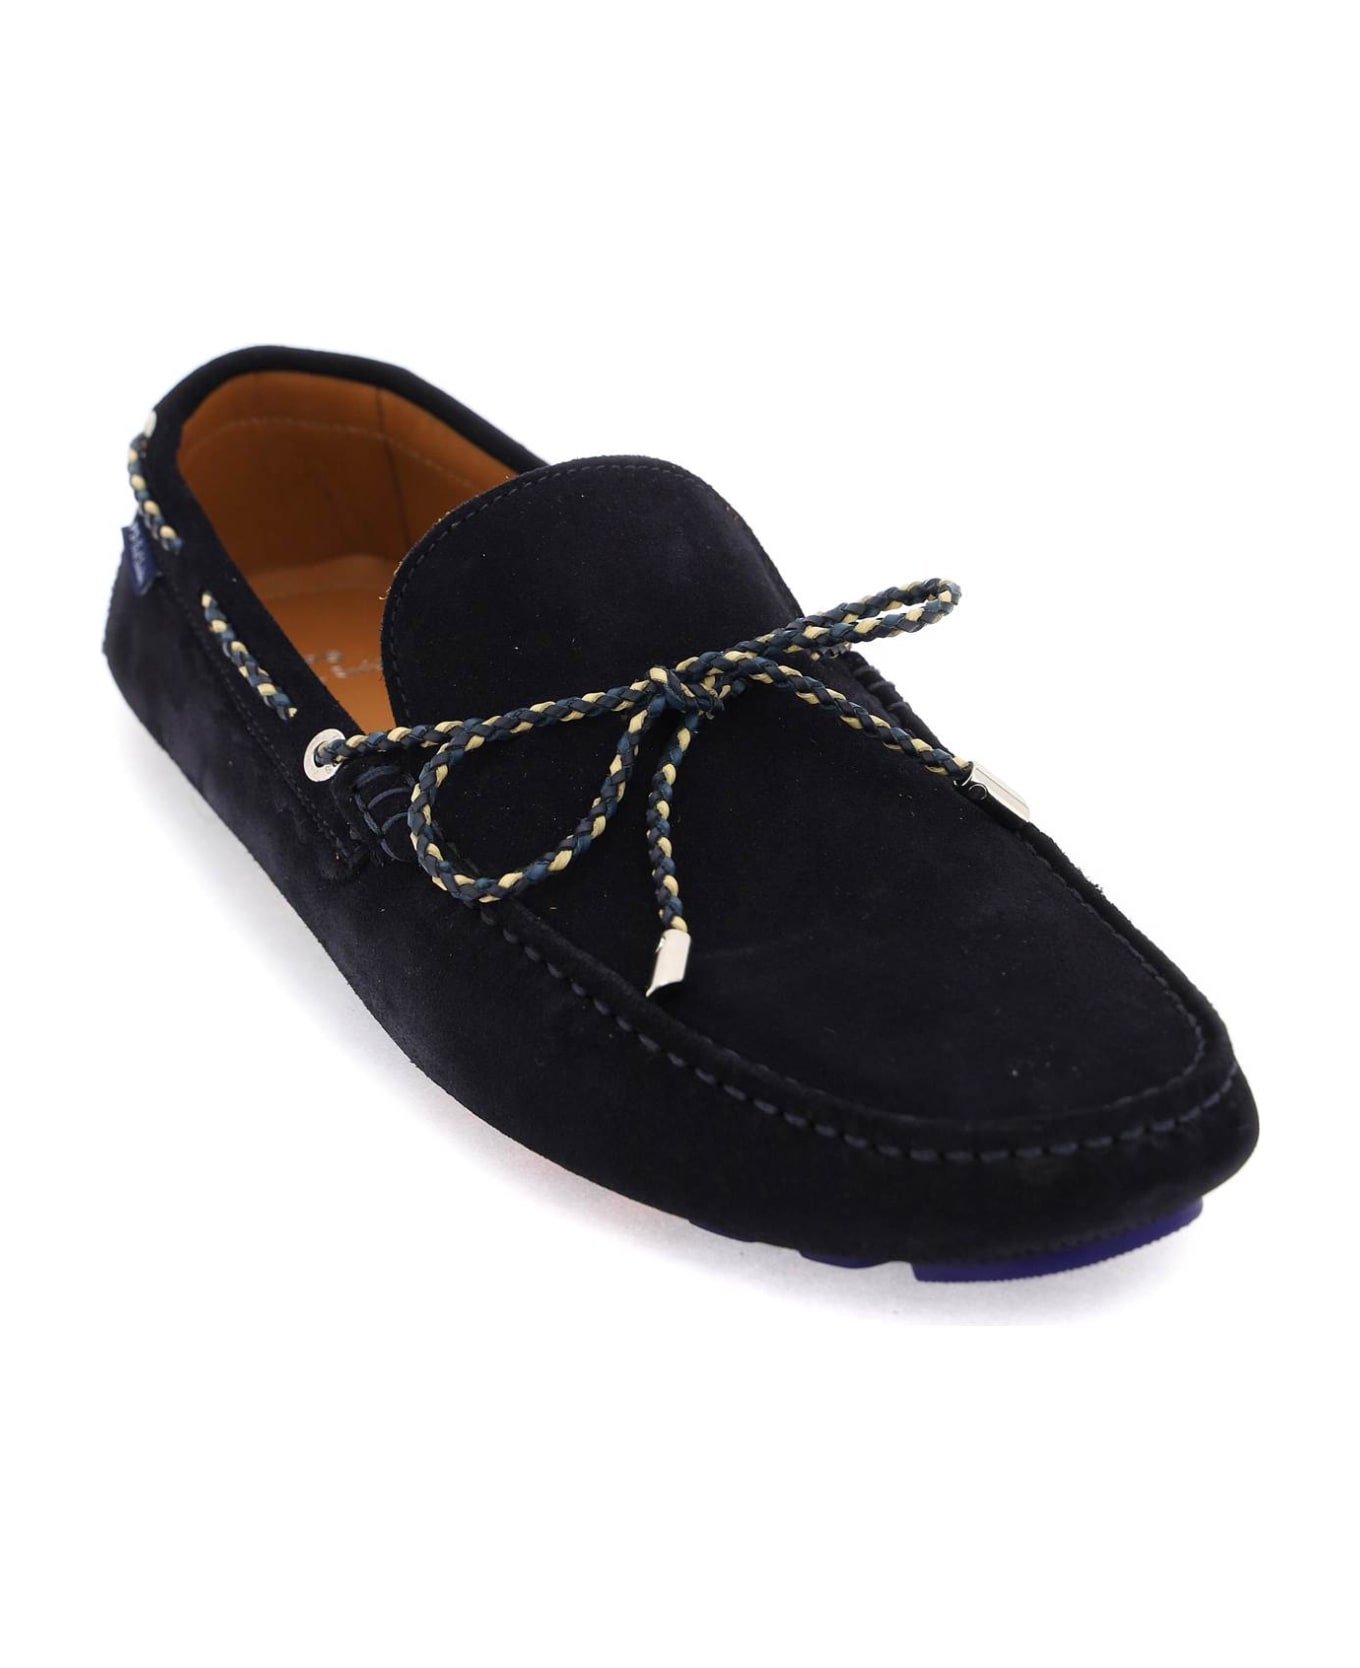 PS by Paul Smith Springfield Suede Loafers - VERY DARK NAVY (Blue)